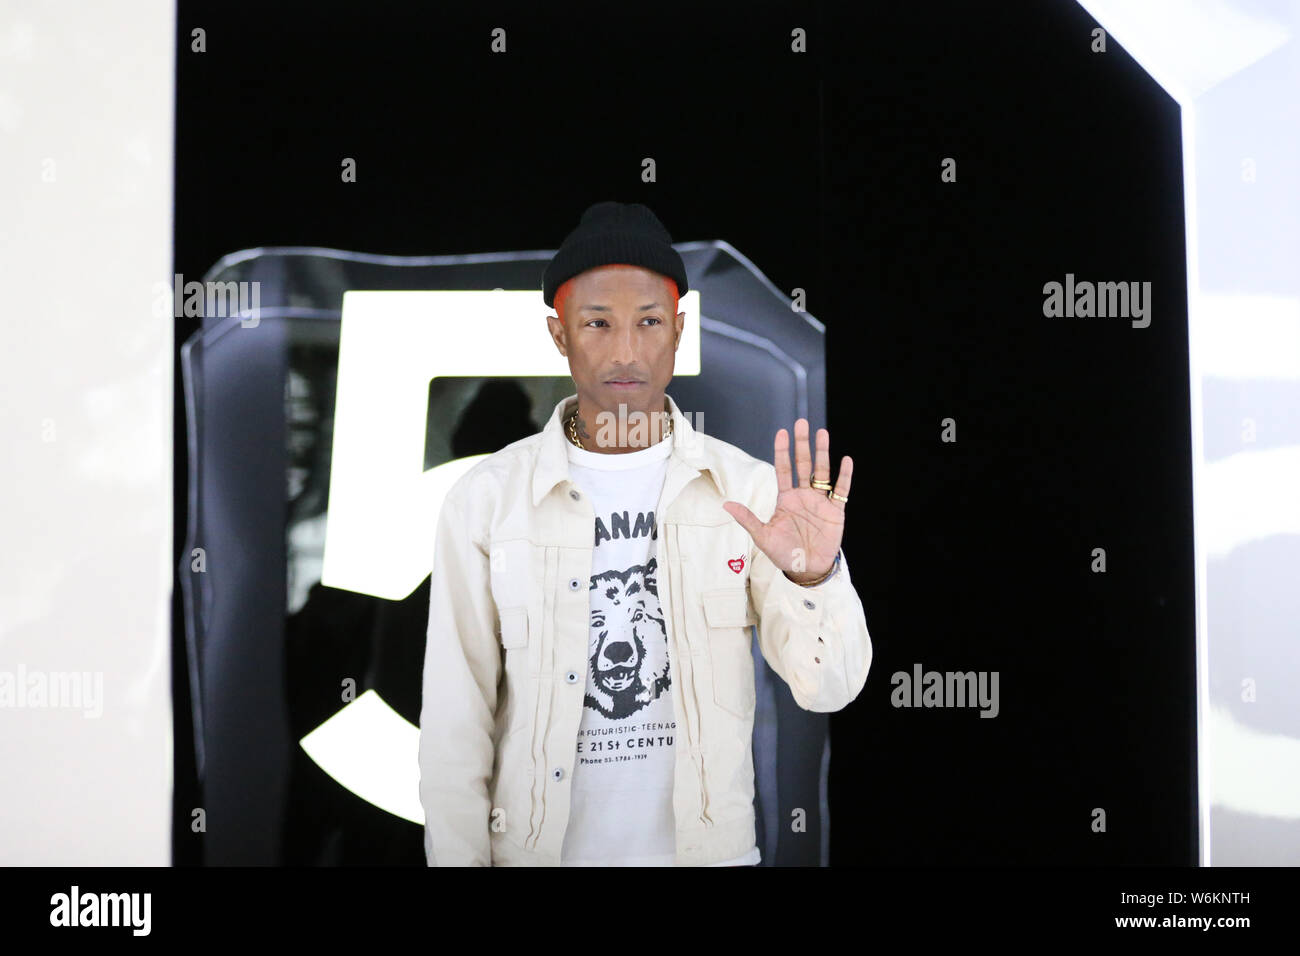 American rapper singer Pharrell Williams is pictured as he attends the opening event of Chanel's Mademoiselle Prive exhibition in Hong Kong, China, 11 Stock Photo